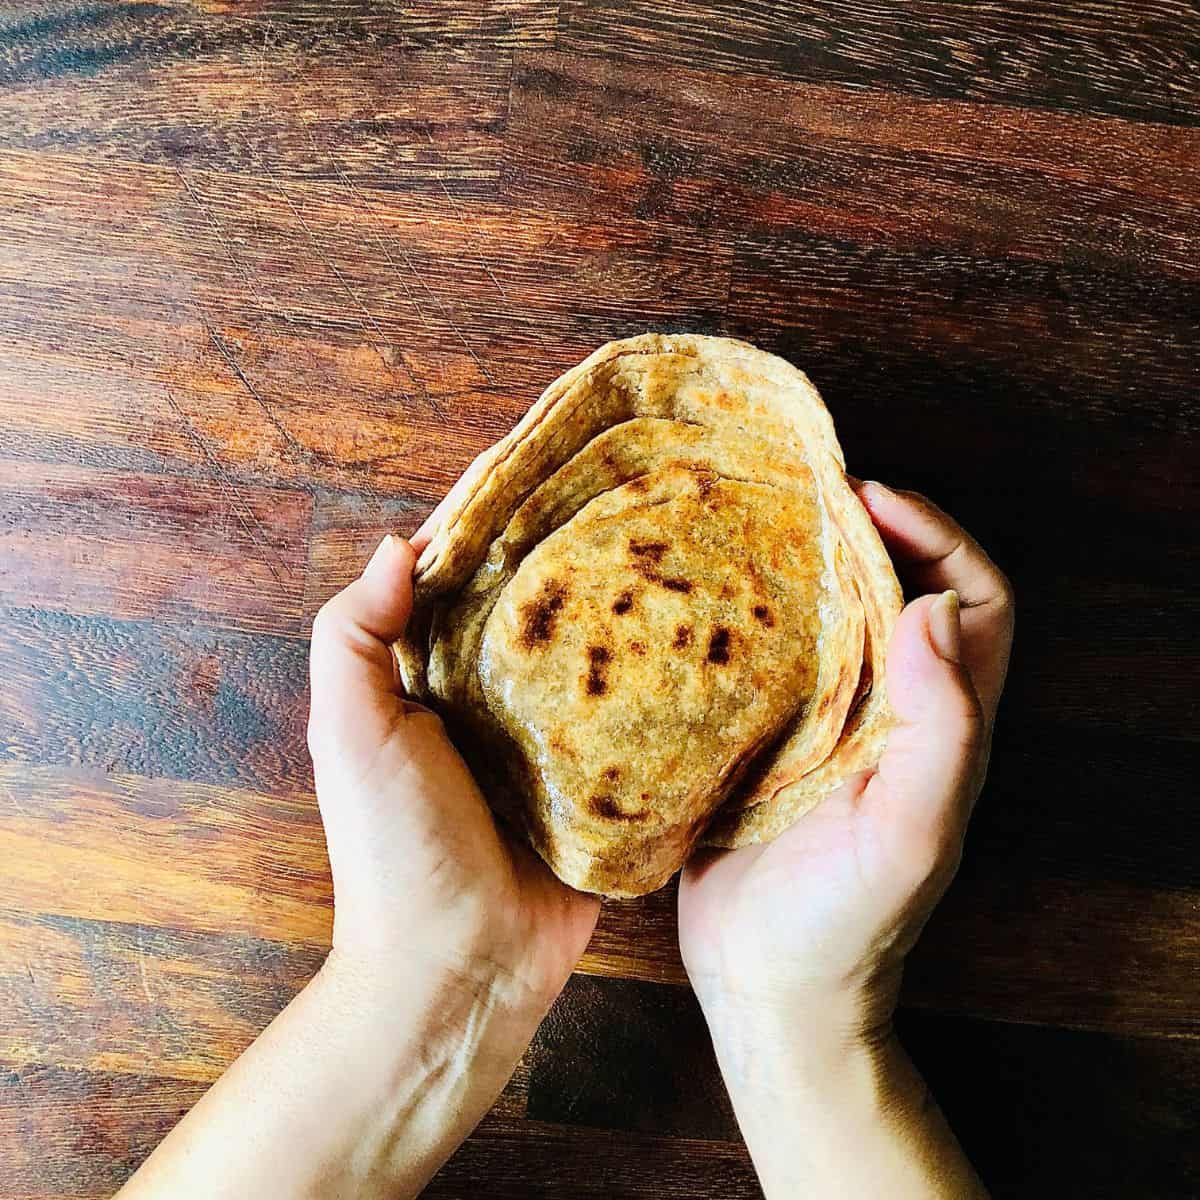 Laccha paratha held between two hands, showing the layers of the laccha paratha.